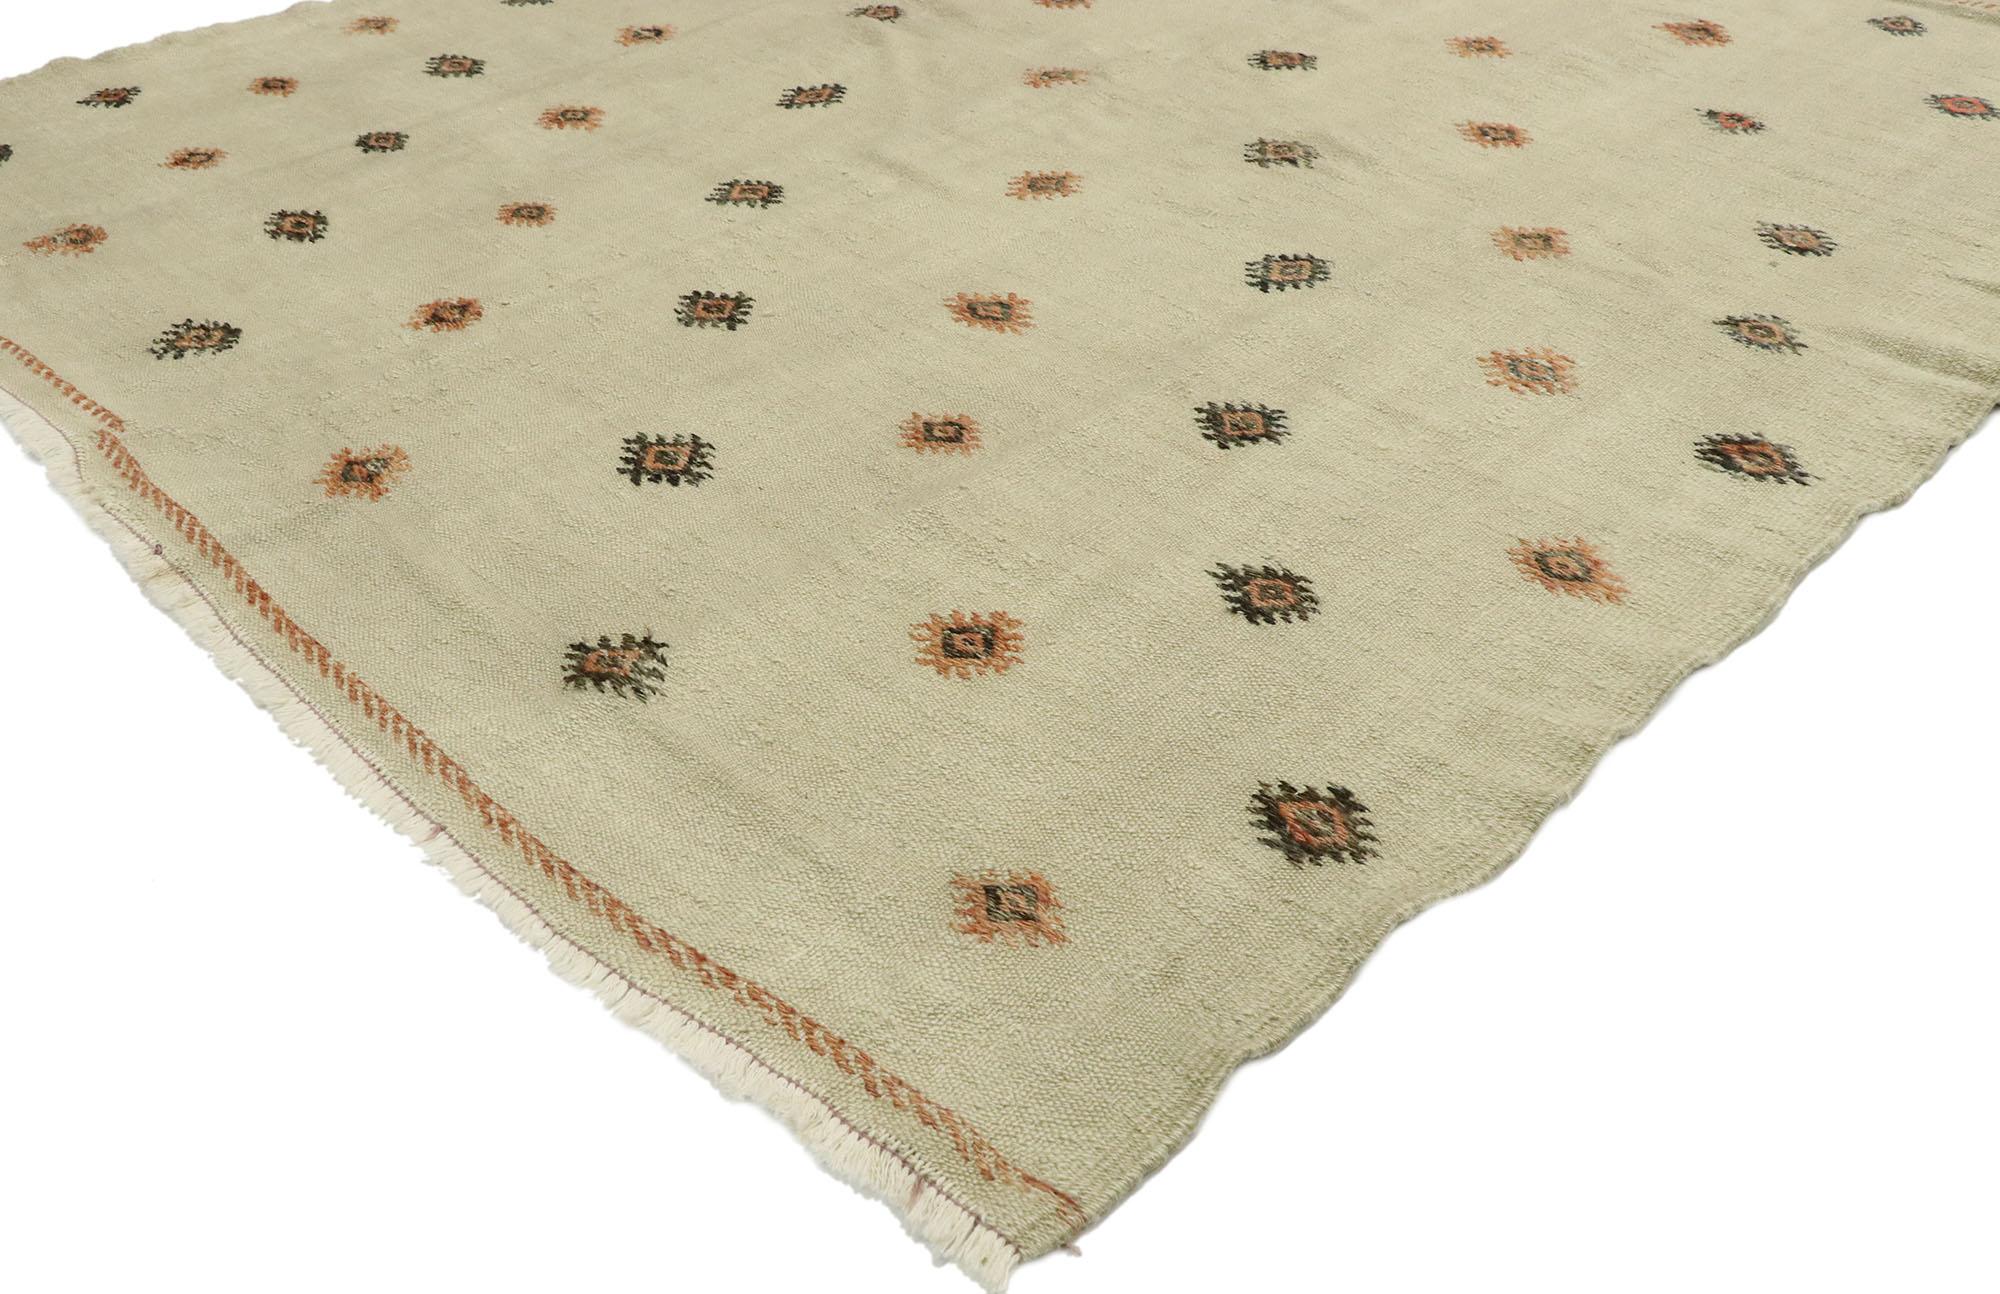 53119, distressed vintage Turkish Kilim rug with Southwestern Desert Tribal style. Tribal charm with rustic sensibility, this handwoven wool distressed vintage Turkish Kilim rug beautifully showcases a southwestern desert style. The composition is